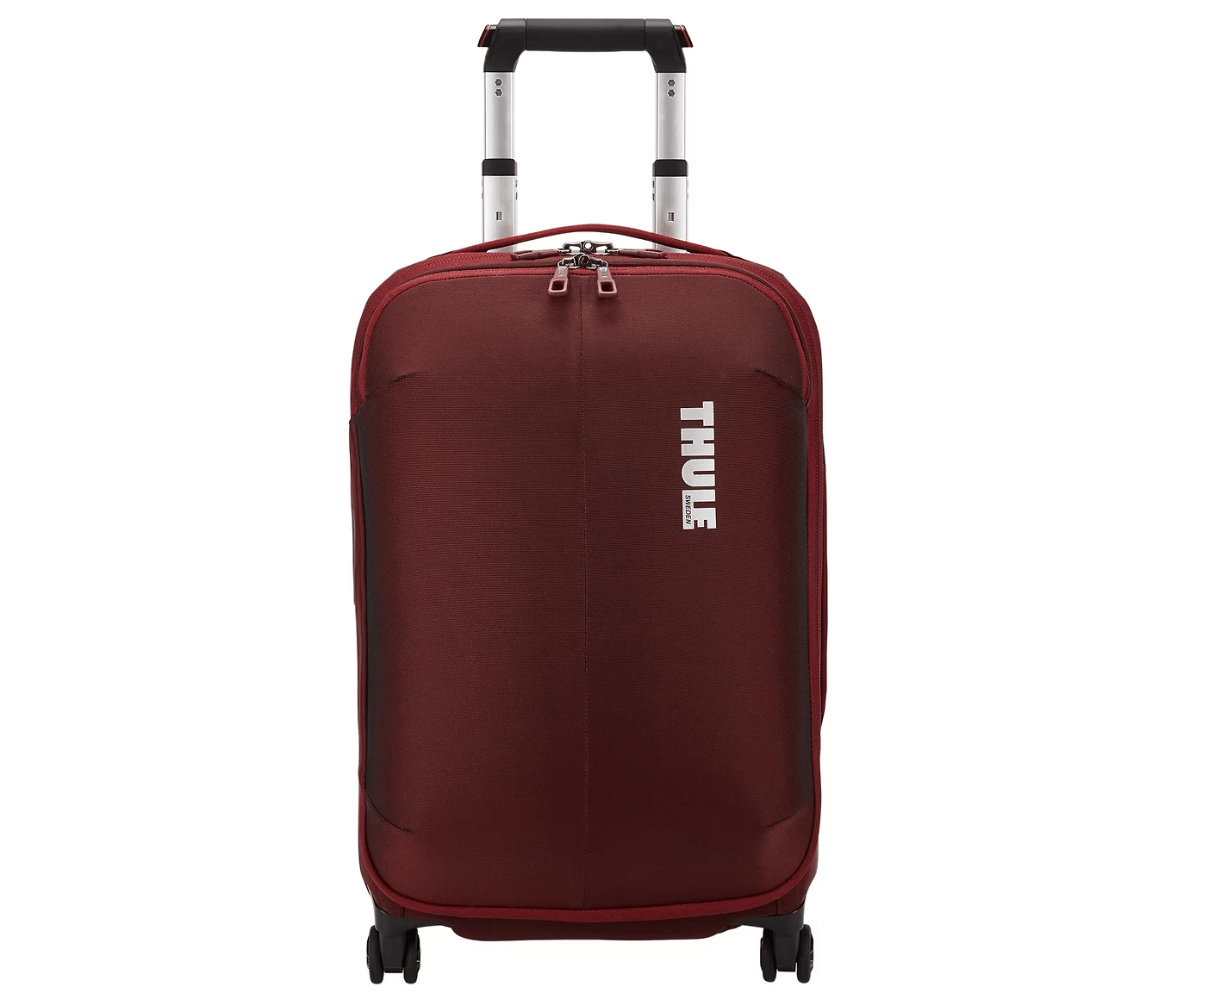 thule subterra carry on spinner suitcase red suitcase white thule text black and silver handle